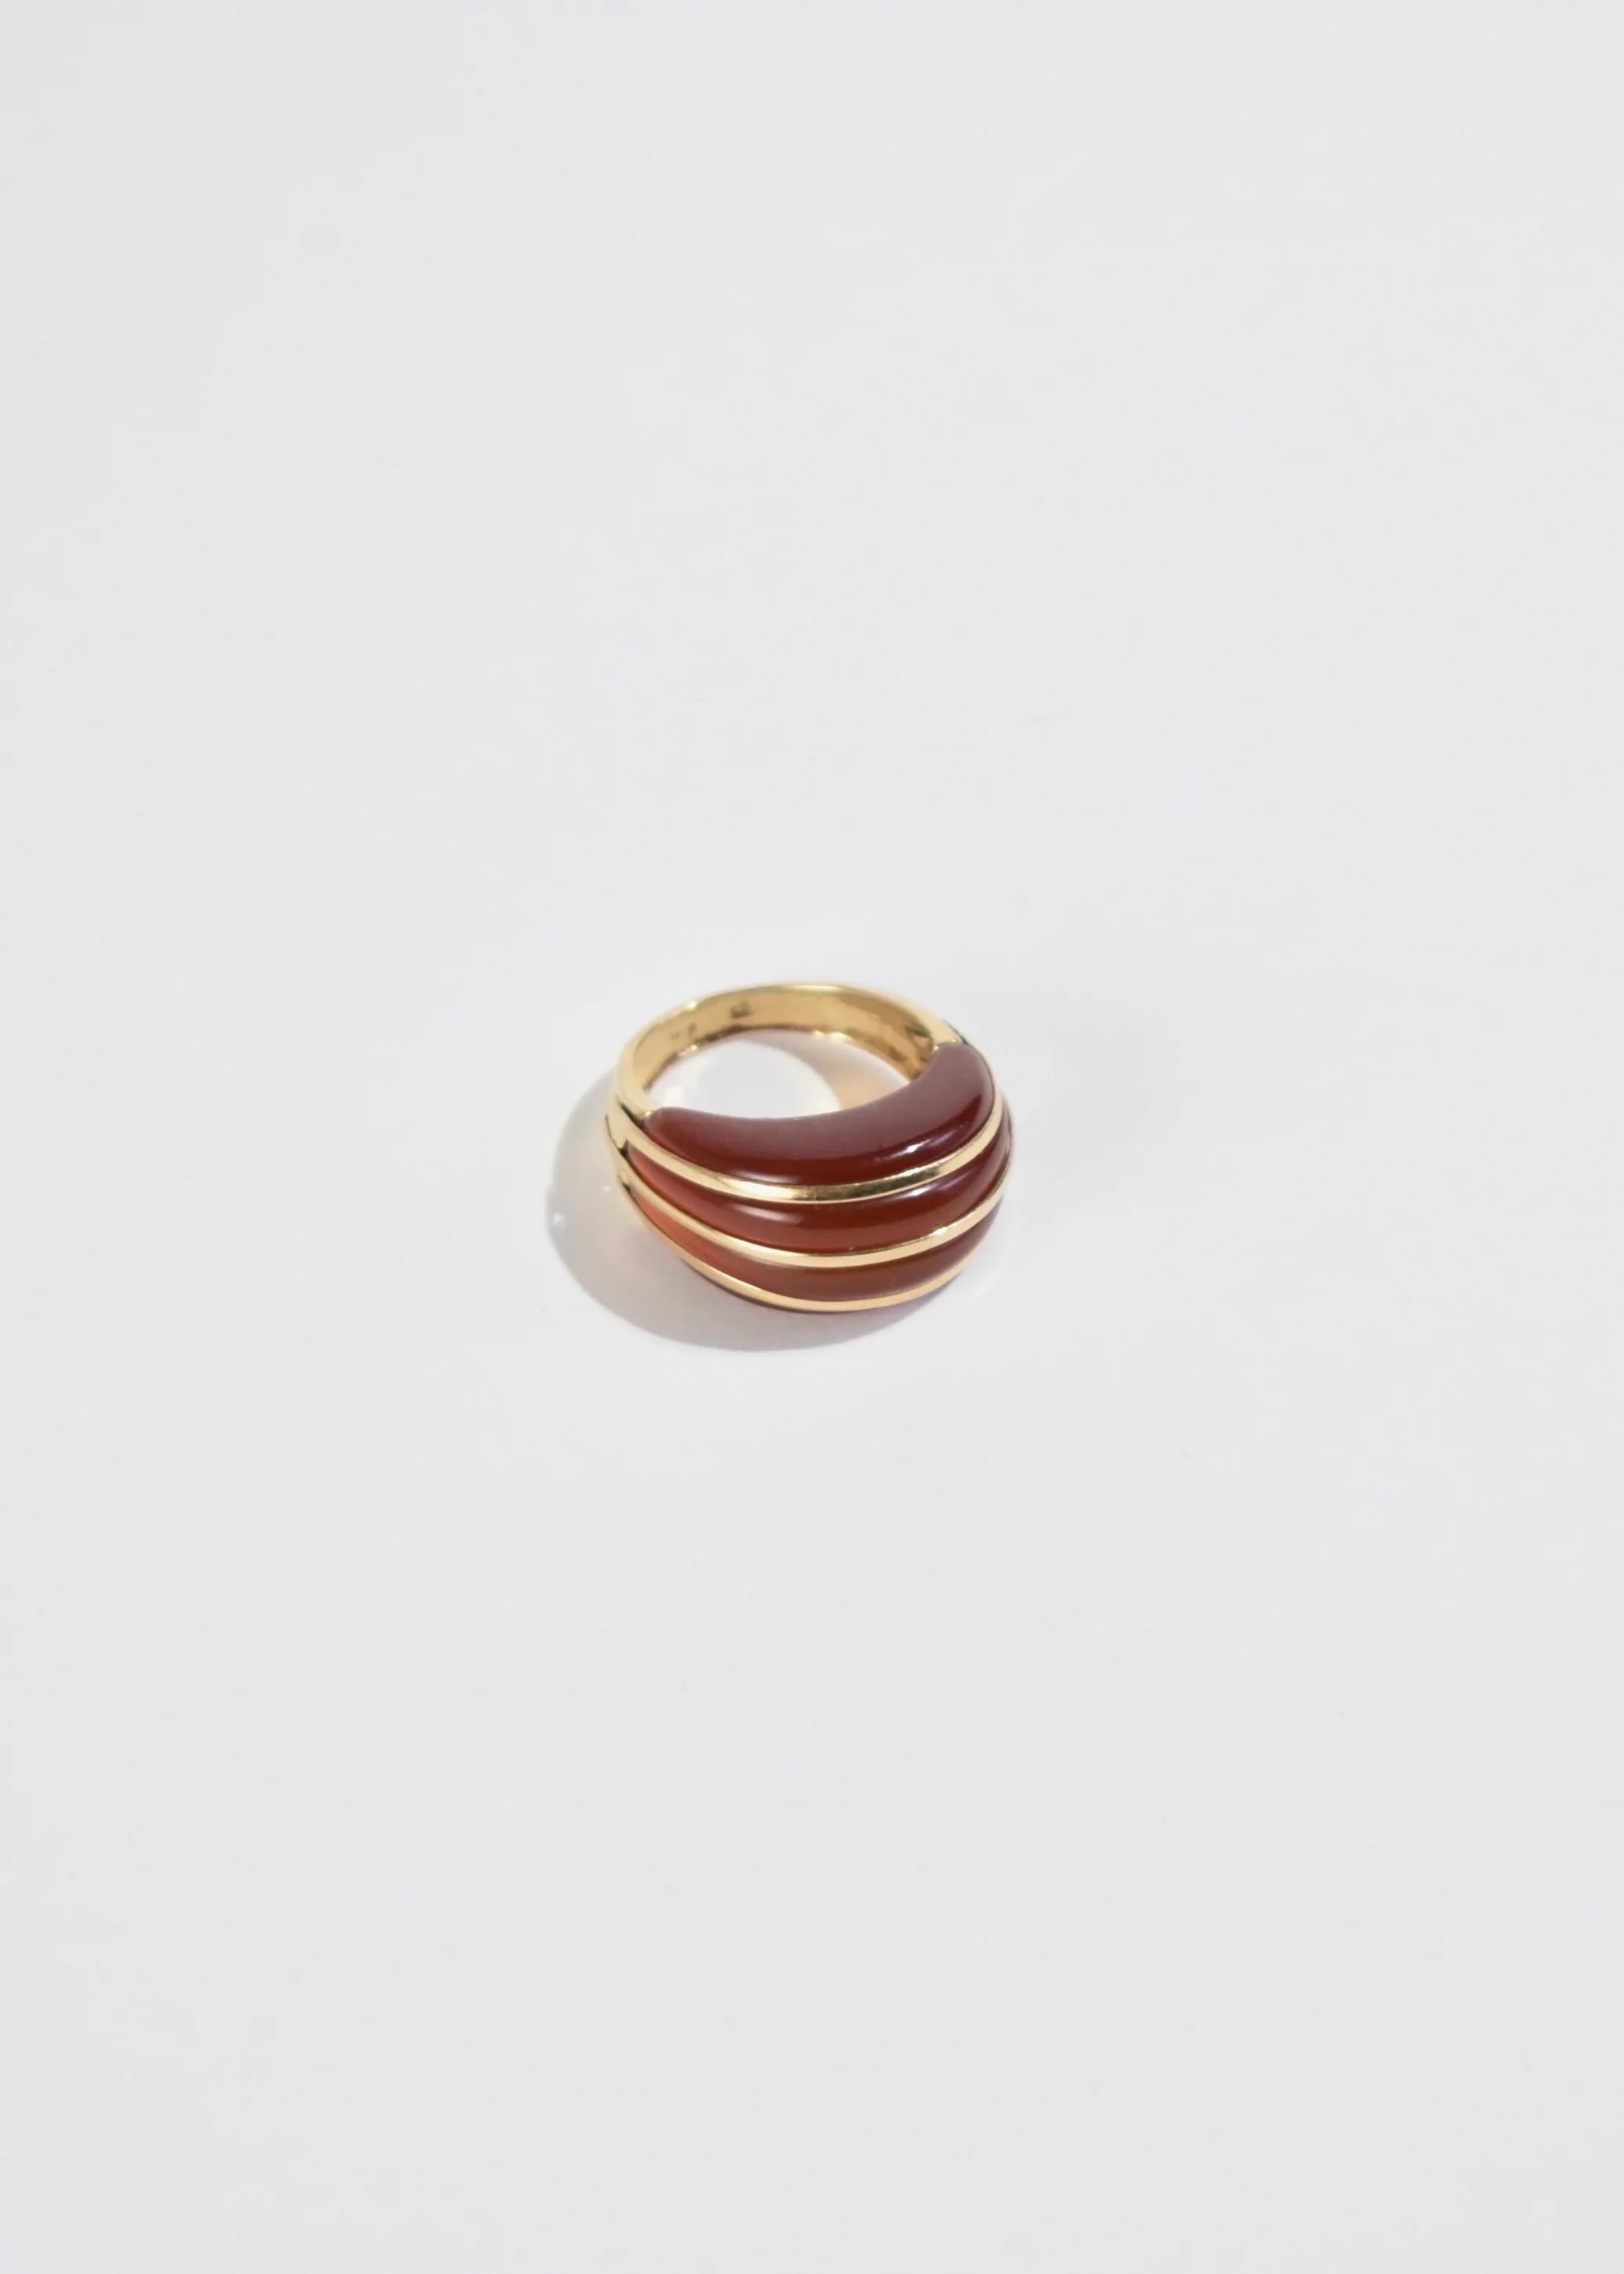 Stunning vintage carved carnelian statement ring with gold detail. Stamped 14k.

Material: 14k gold, carnelian.

We recommend storing in a dry place and periodic polishing with a cloth.